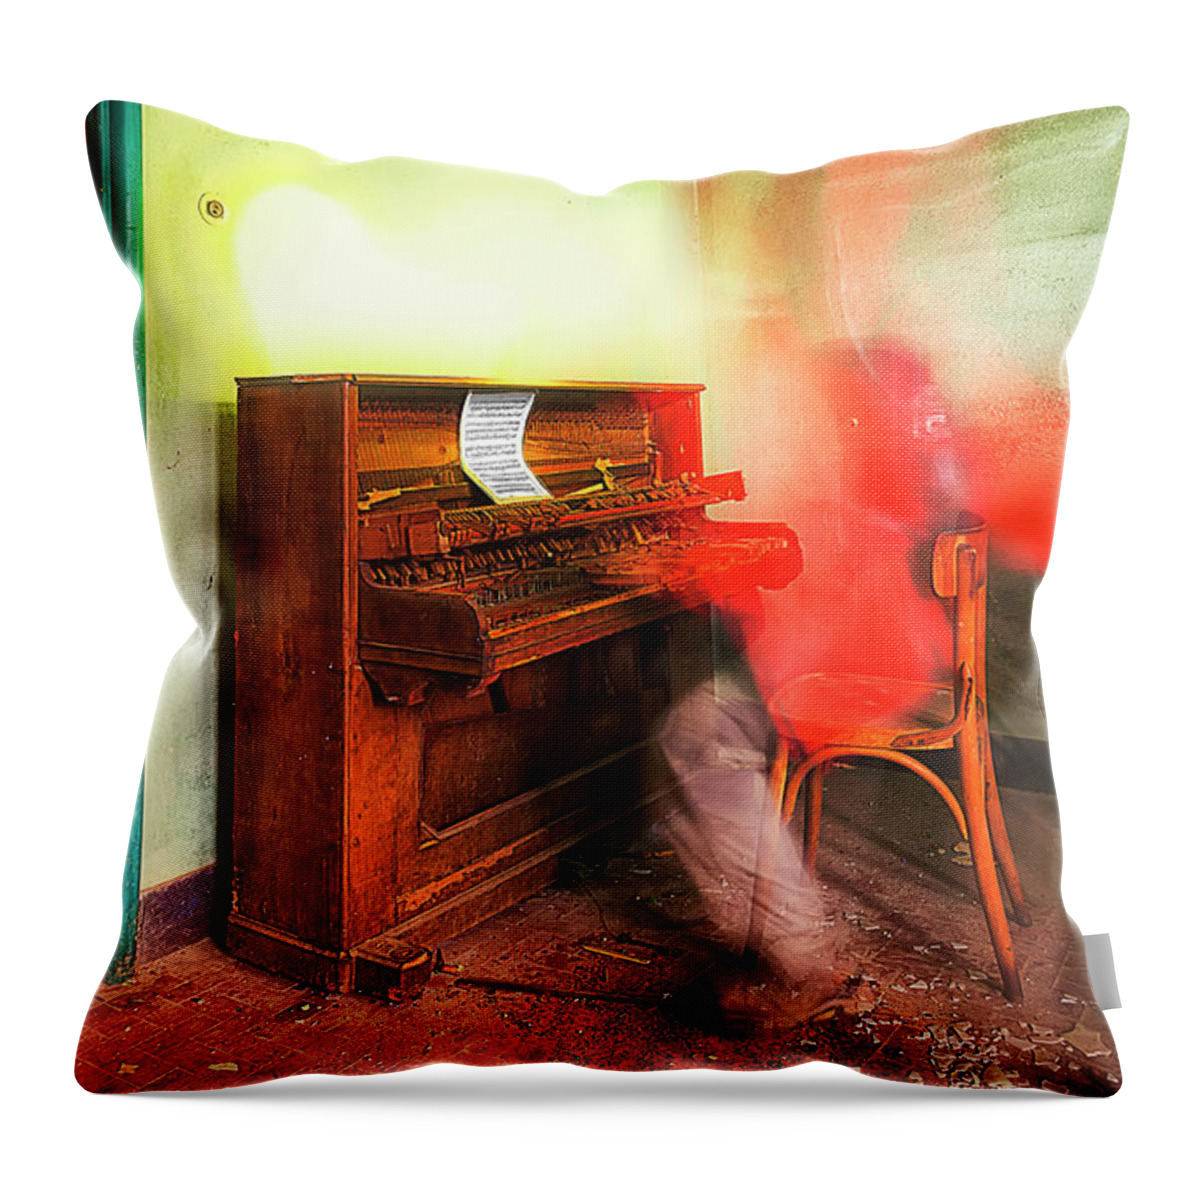 Musica Throw Pillow featuring the photograph The Piano Player by Enrico Pelos